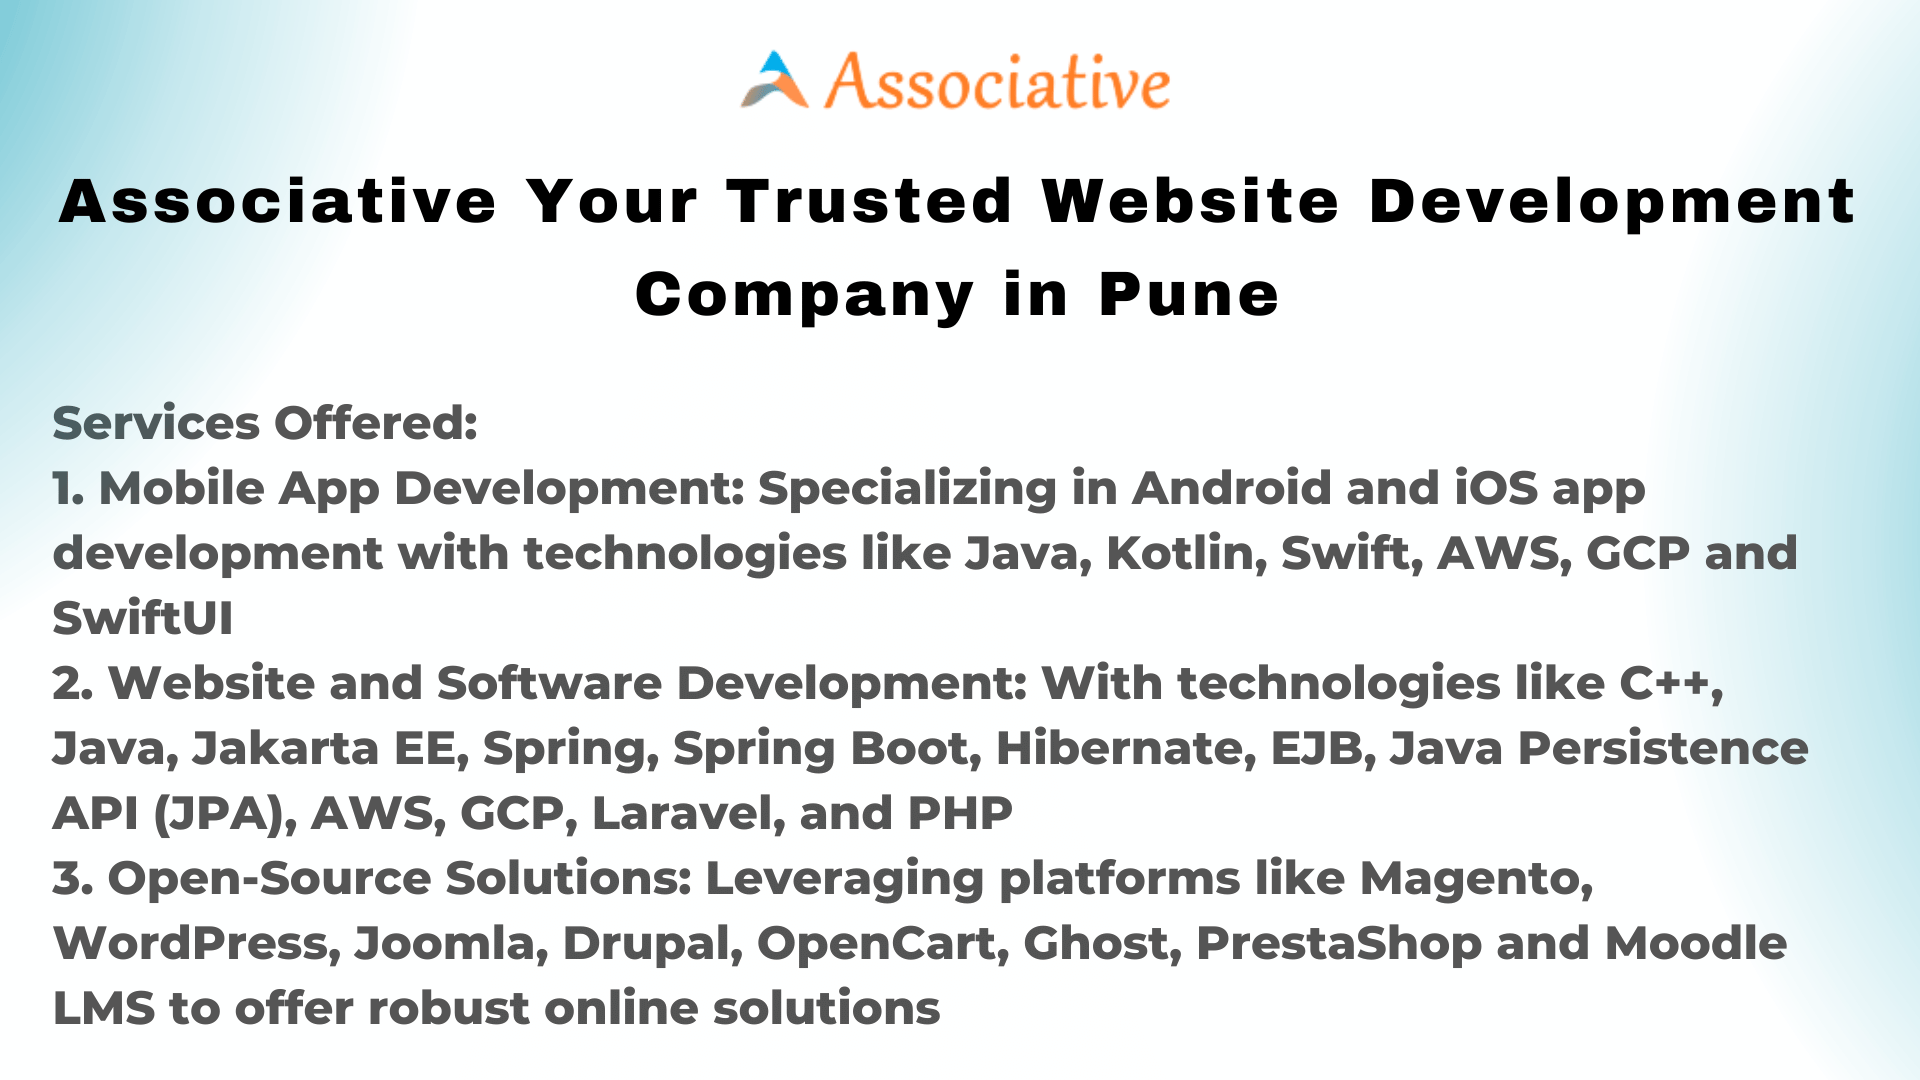 Associative Your Trusted Website Development Company in Pune